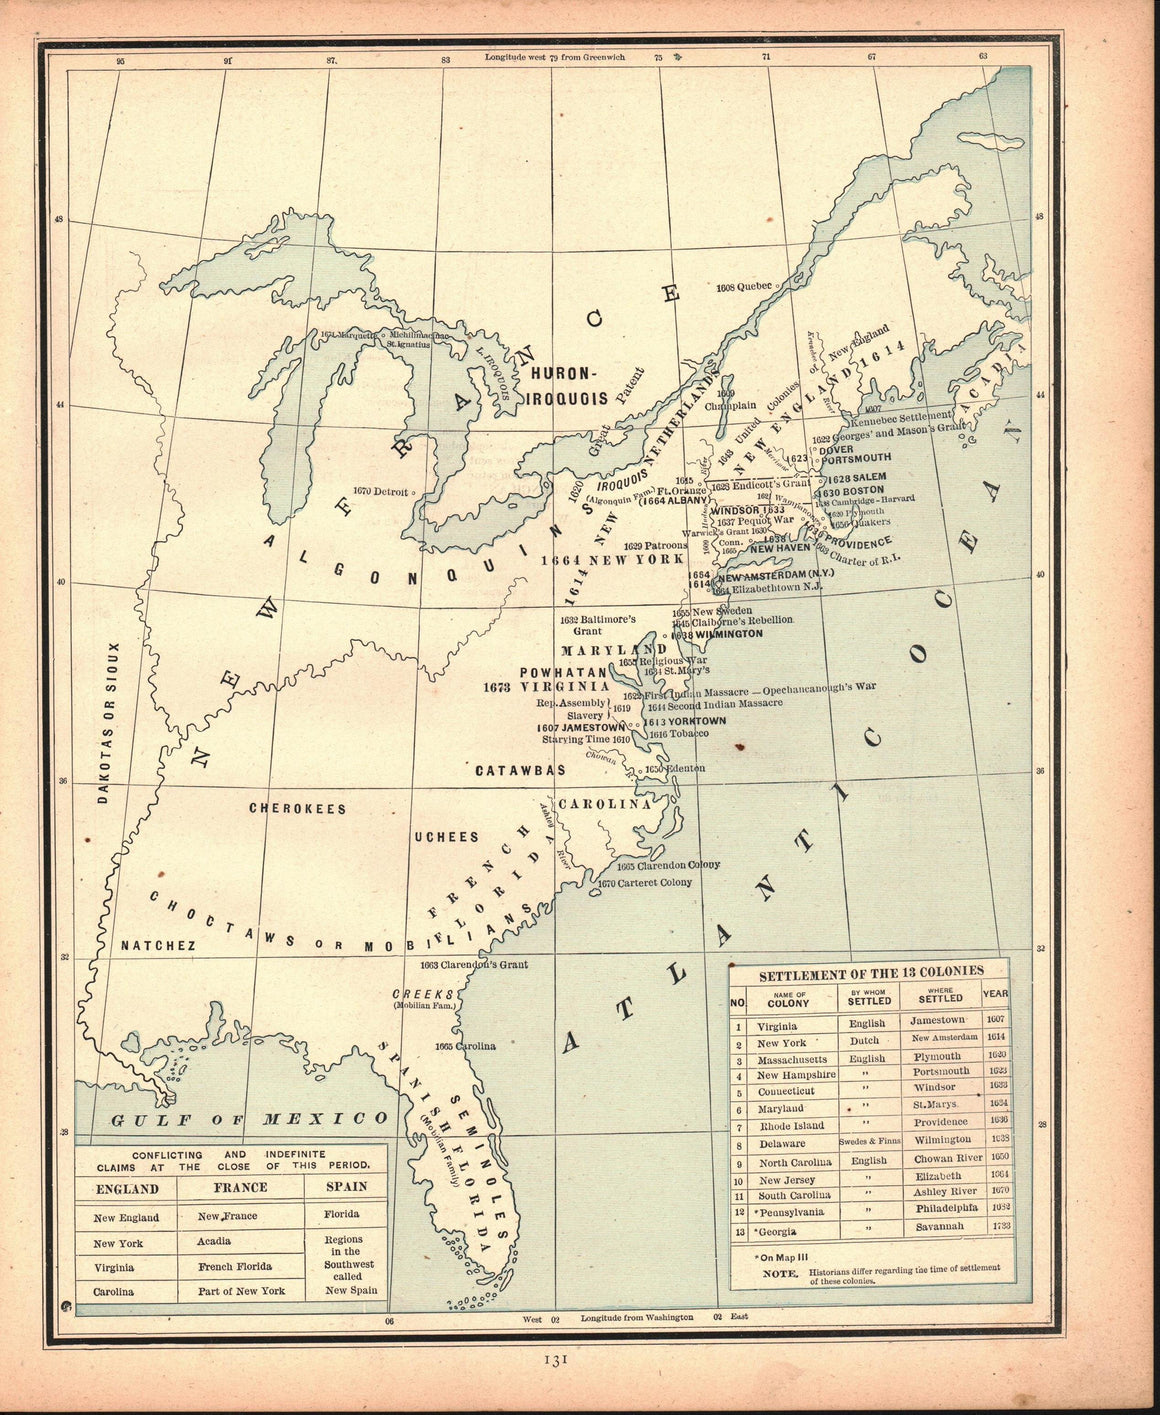 1887 Settlement of the 13 Colonies - Cram